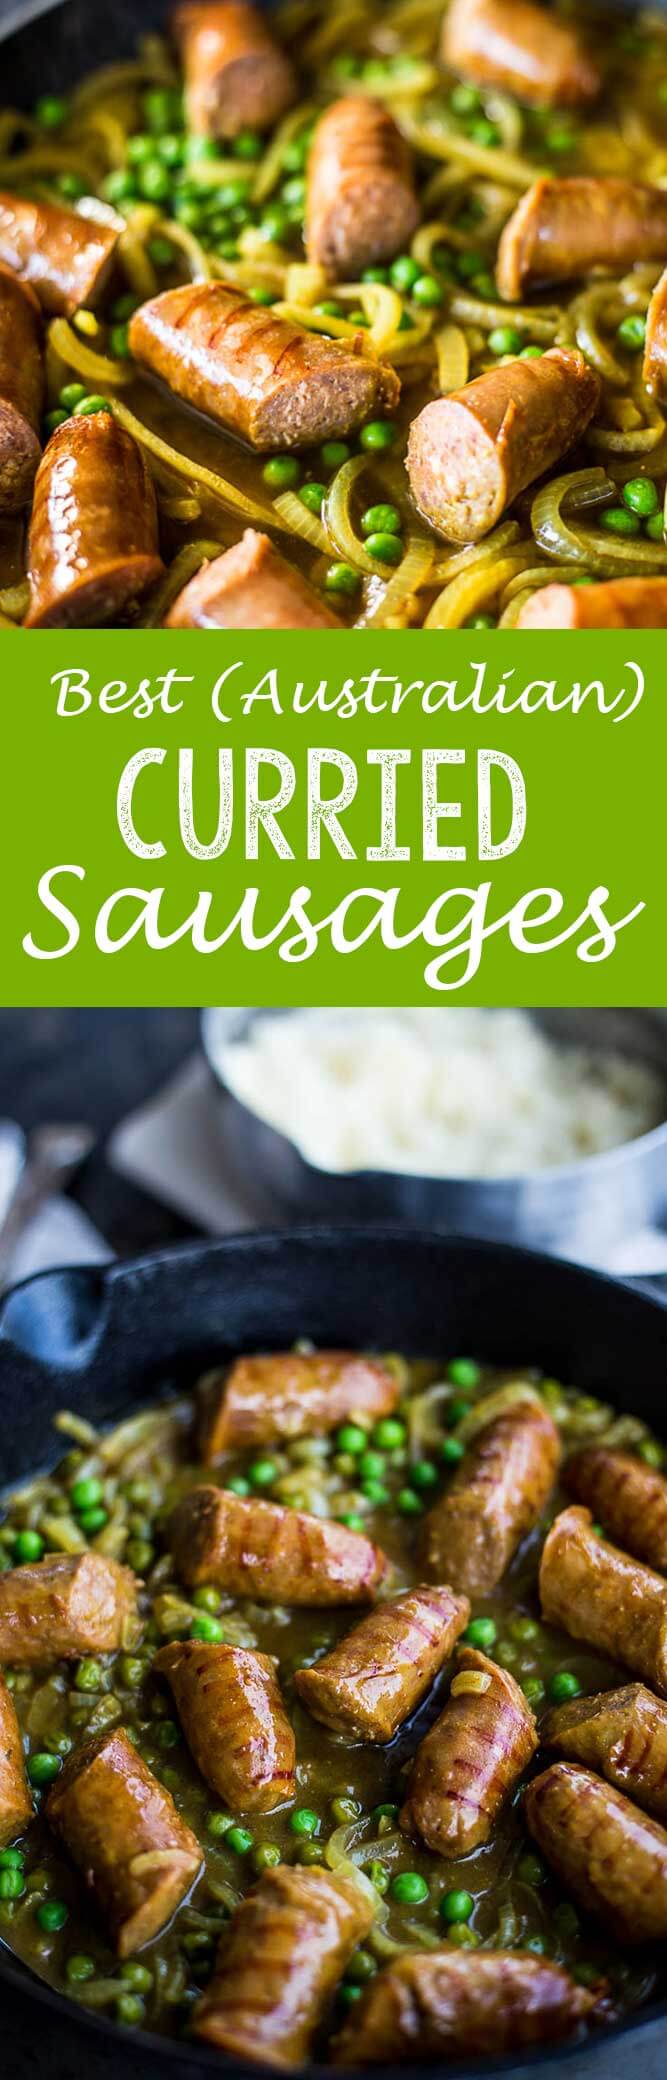 Best Curried Sausages, an Australian dinner that is super delicious!